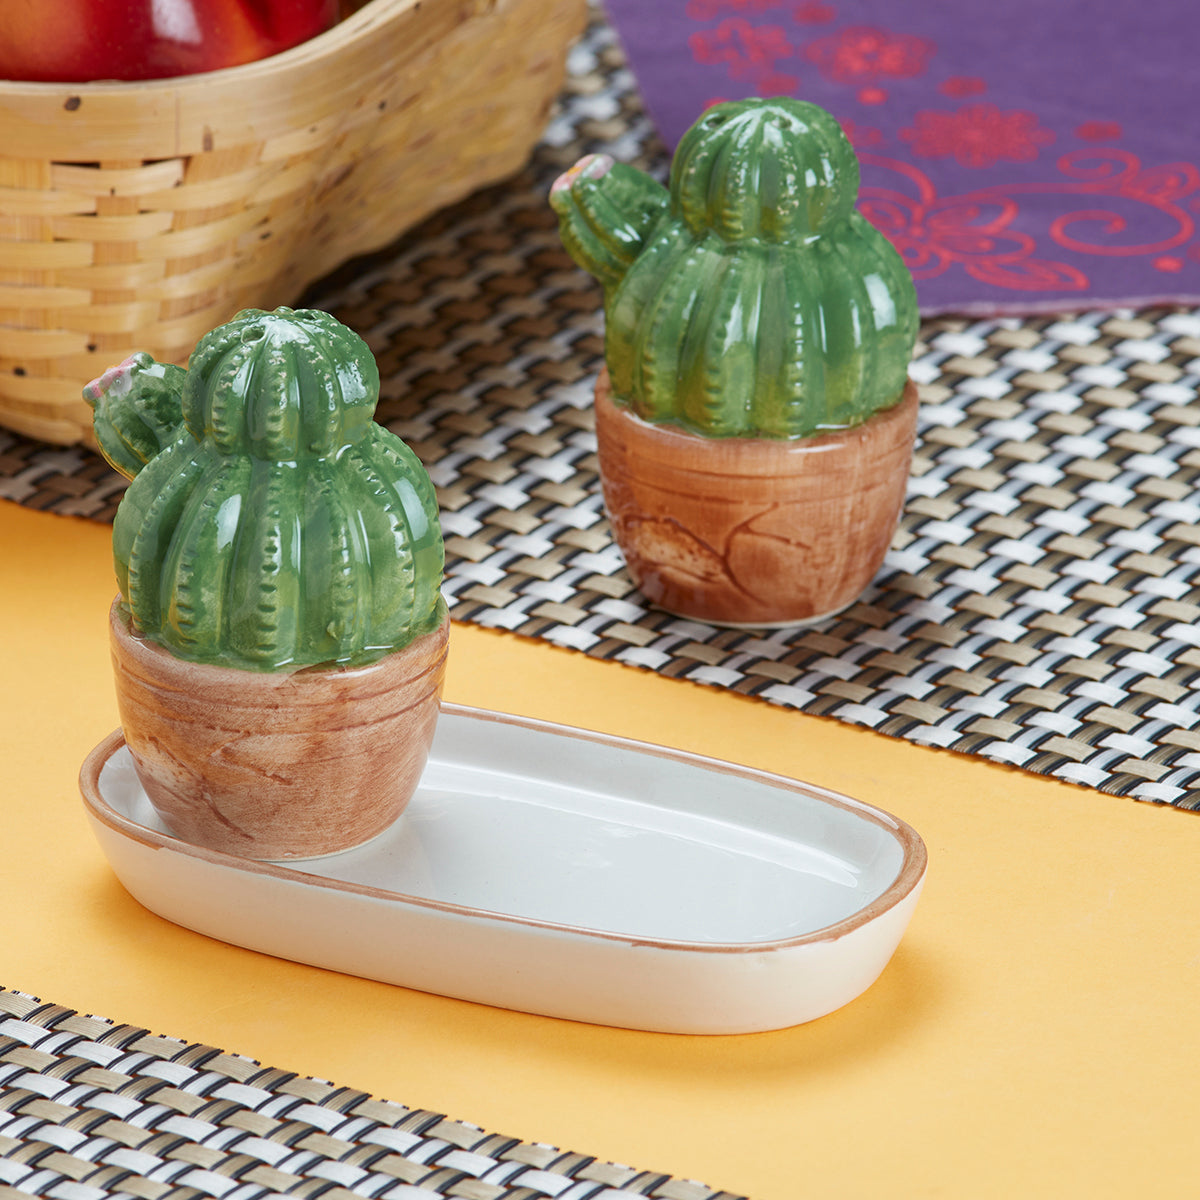 Ceramic Salt Pepper Container Set with tray for Dining Table (9982)